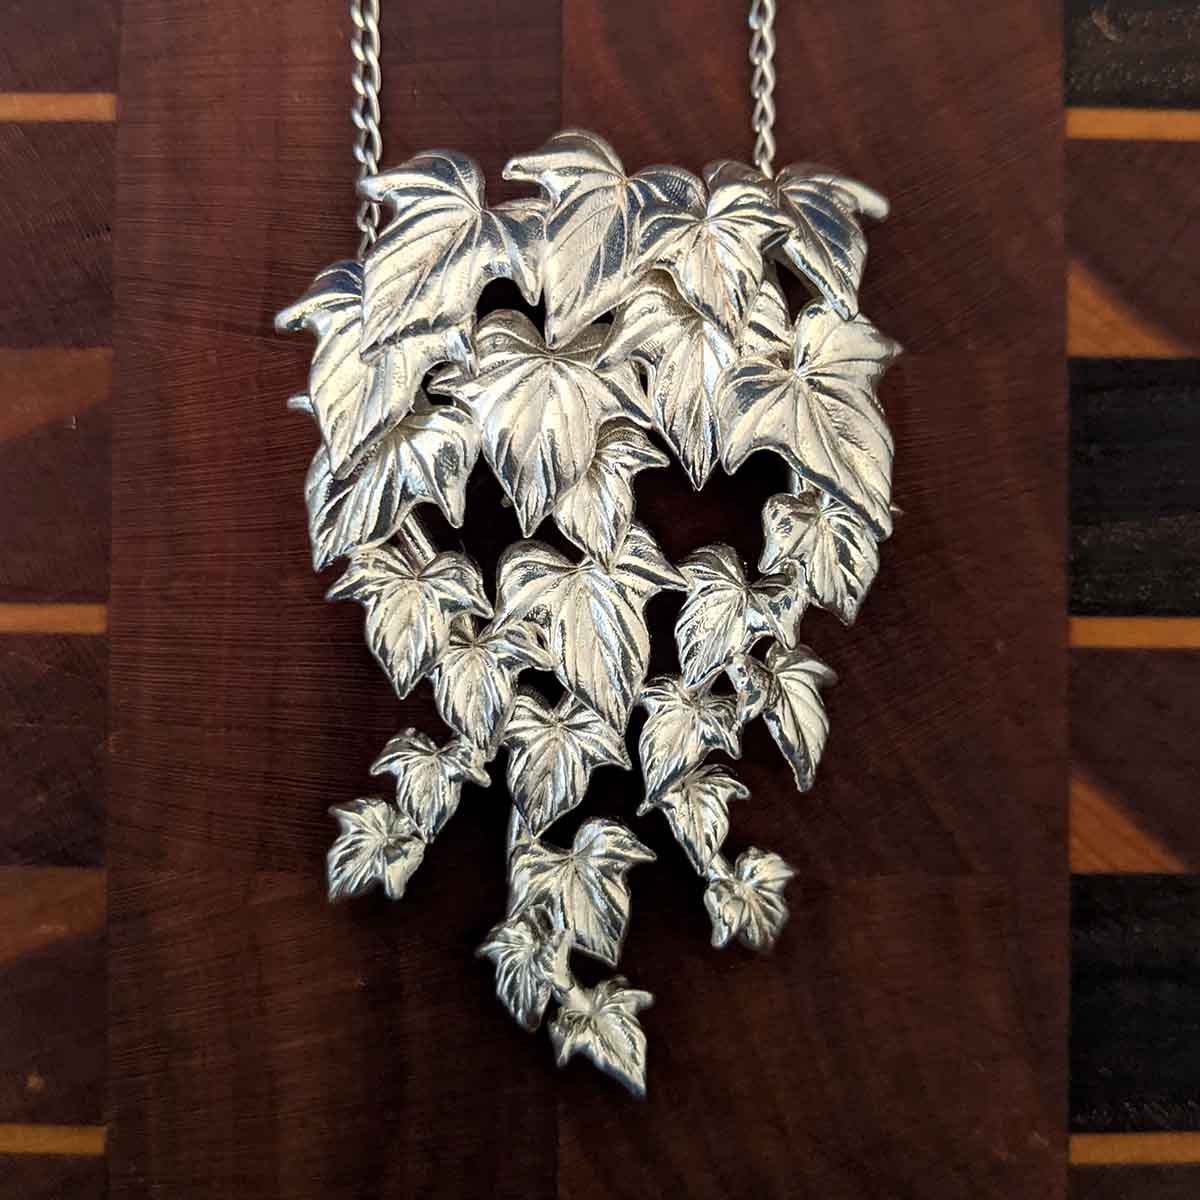    Photo-of-Large-Natural-Satin-Finish-Solid-Sterling-Silver-Flowing-Vine-Pendant-Front-Side-Showing-Flowing-Ivy-Vines